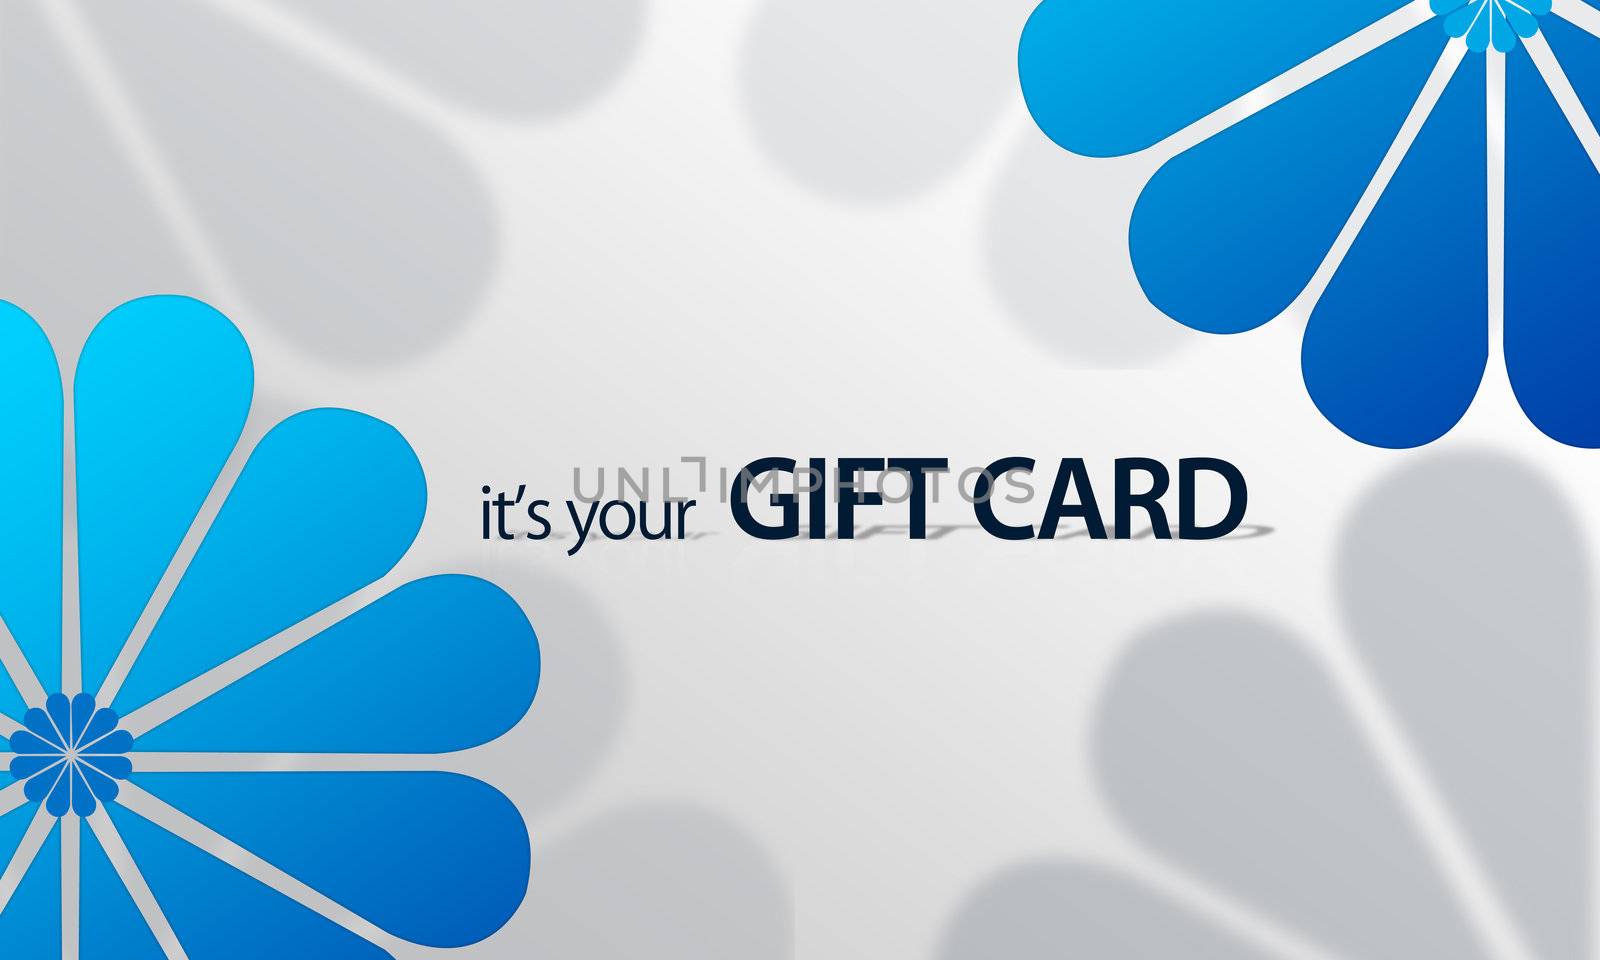 High resolution gift card graphic with blue floral elements ready to print.